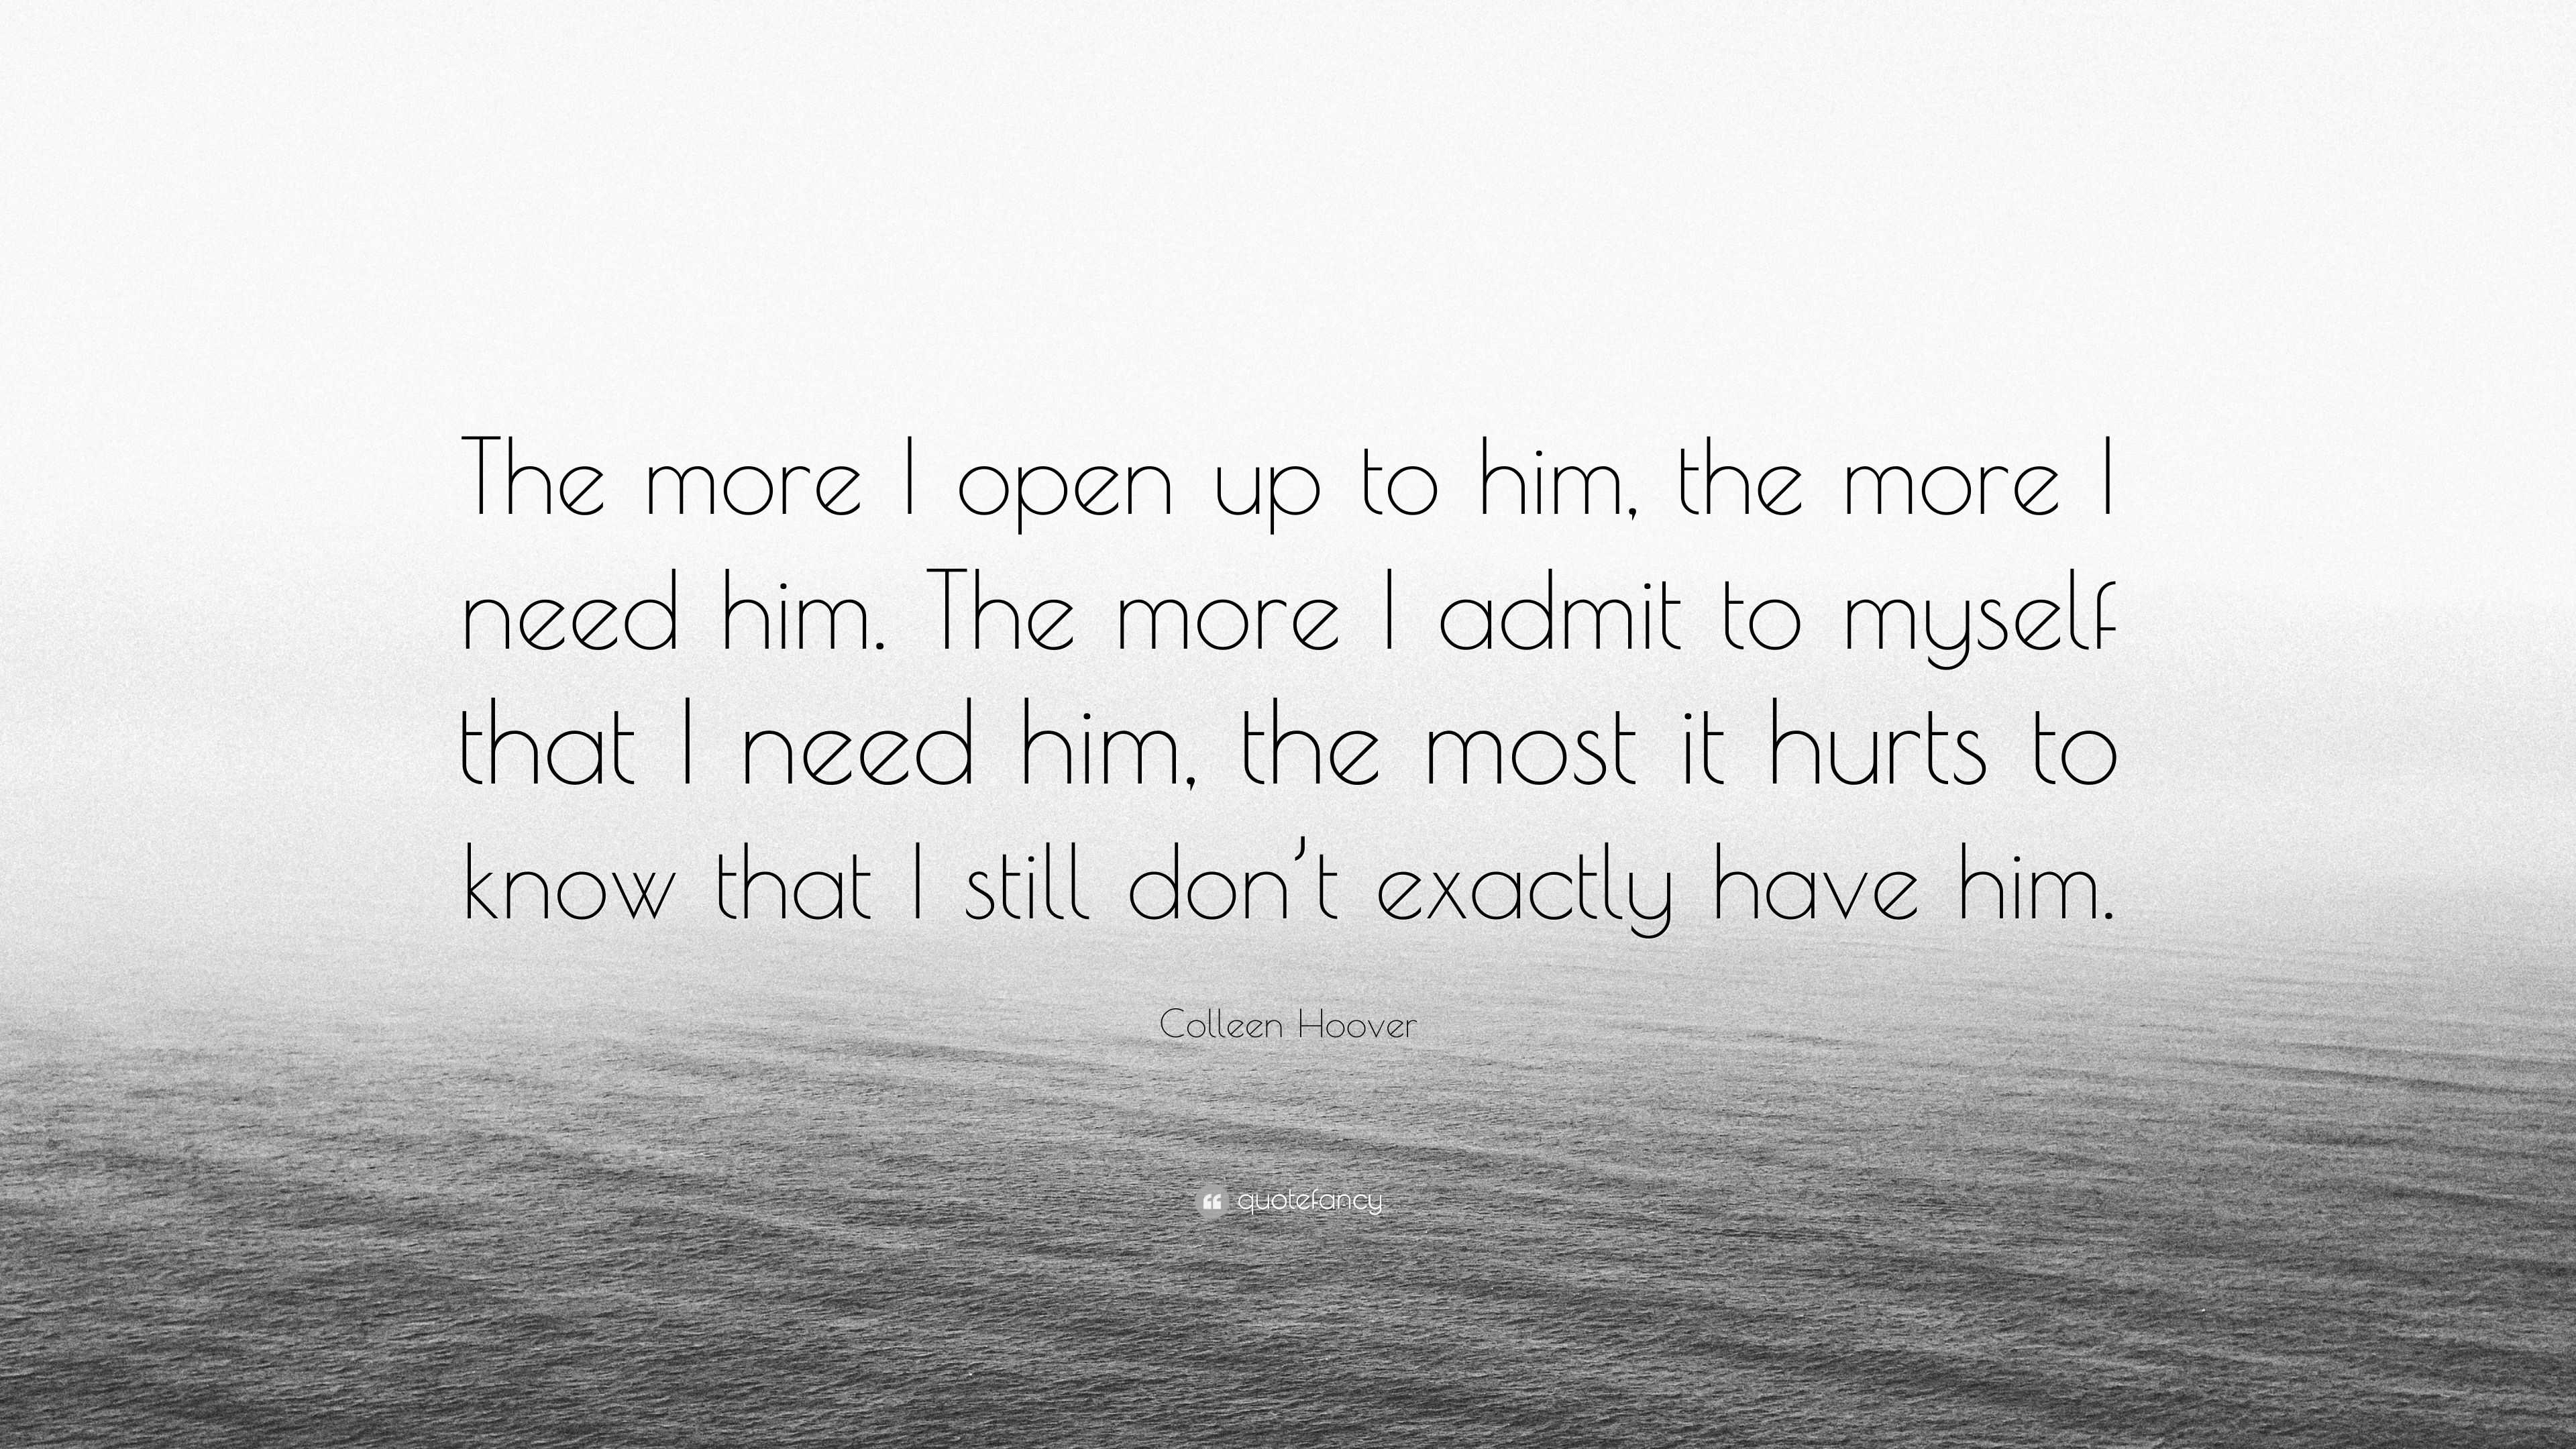 love hurts quotes and sayings for him